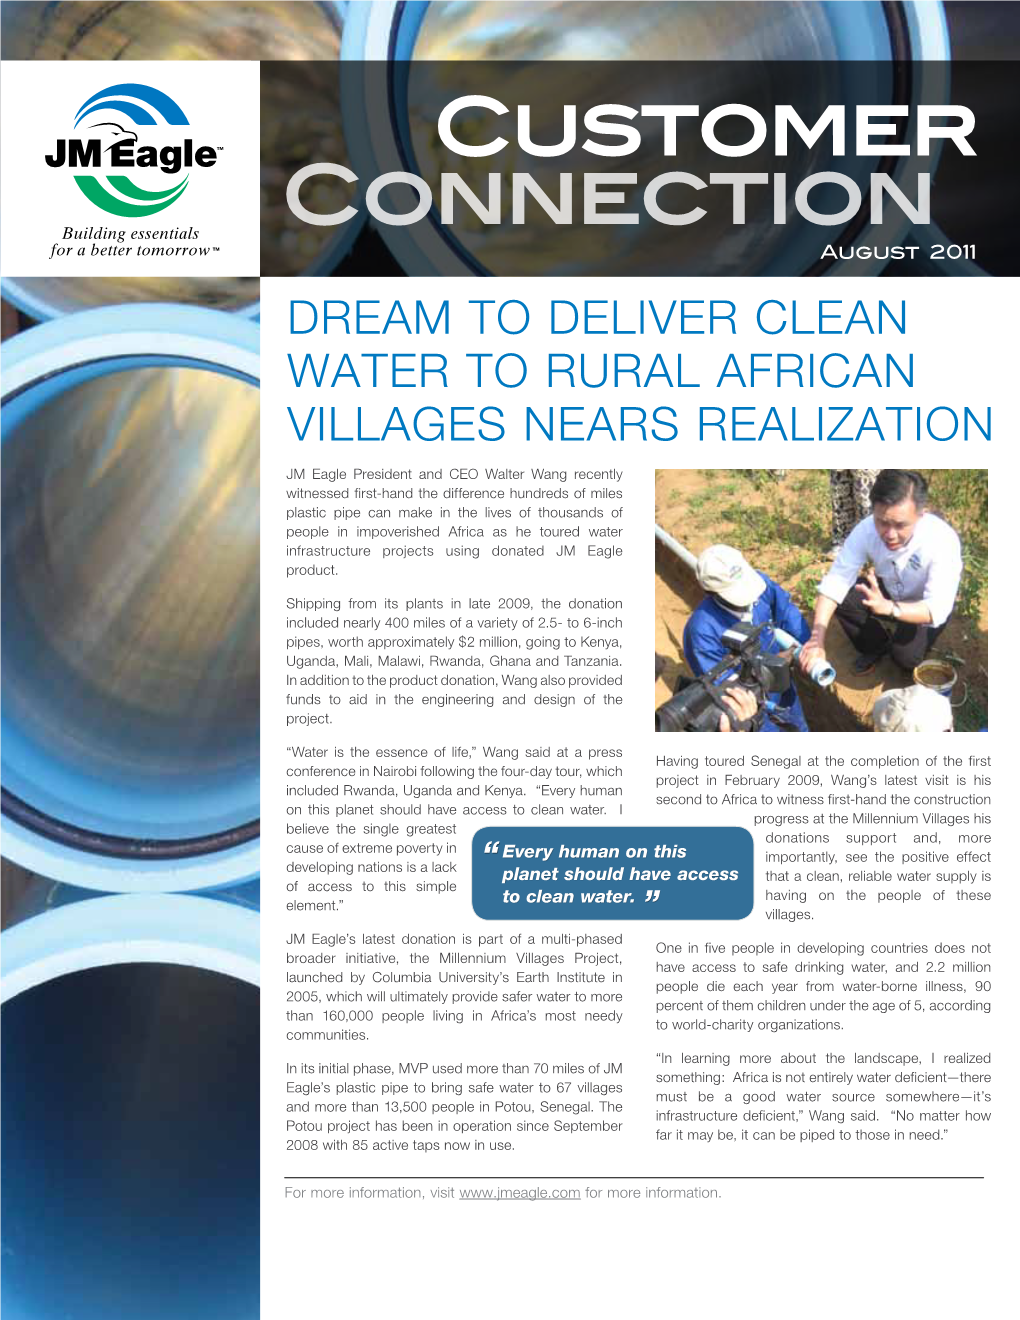 Dream to Deliver Clean Water to Rural African Villages Nears Realization